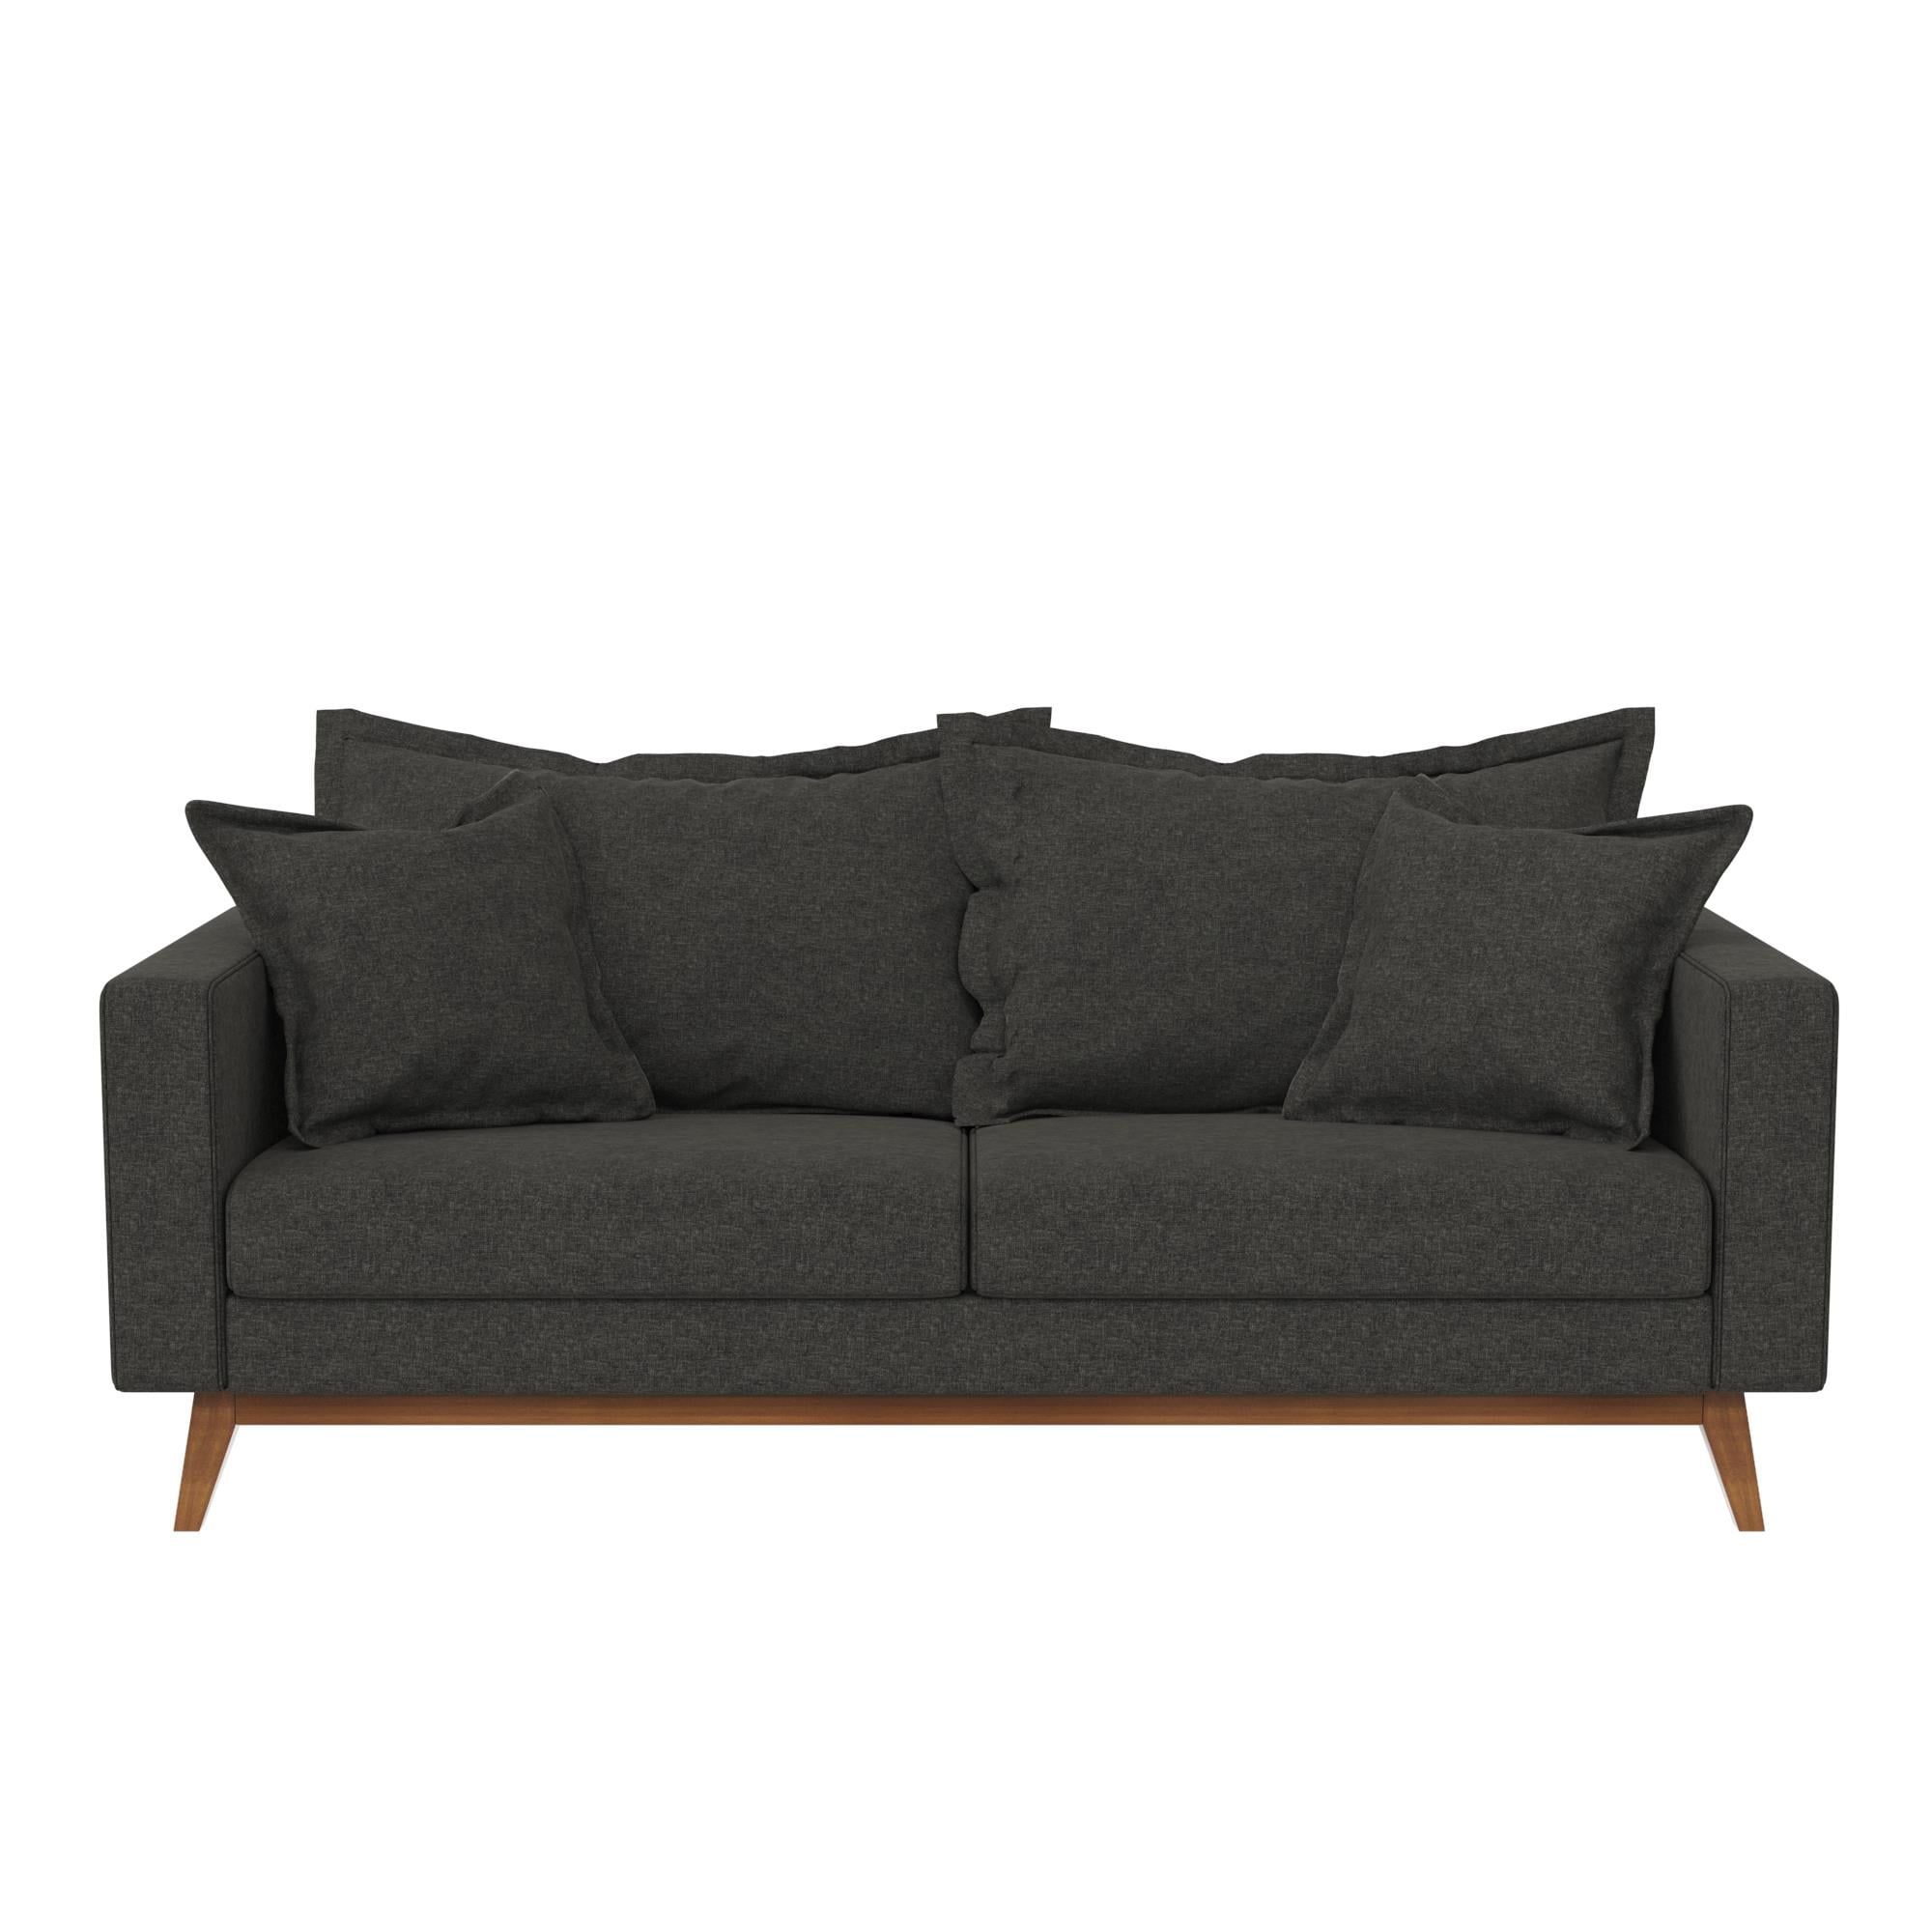 Dhp Miriam Pillowback Wood Base Sofa, Gray Linen – Walmart Intended For Sofas With Pillowback Wood Bases (Gallery 13 of 20)